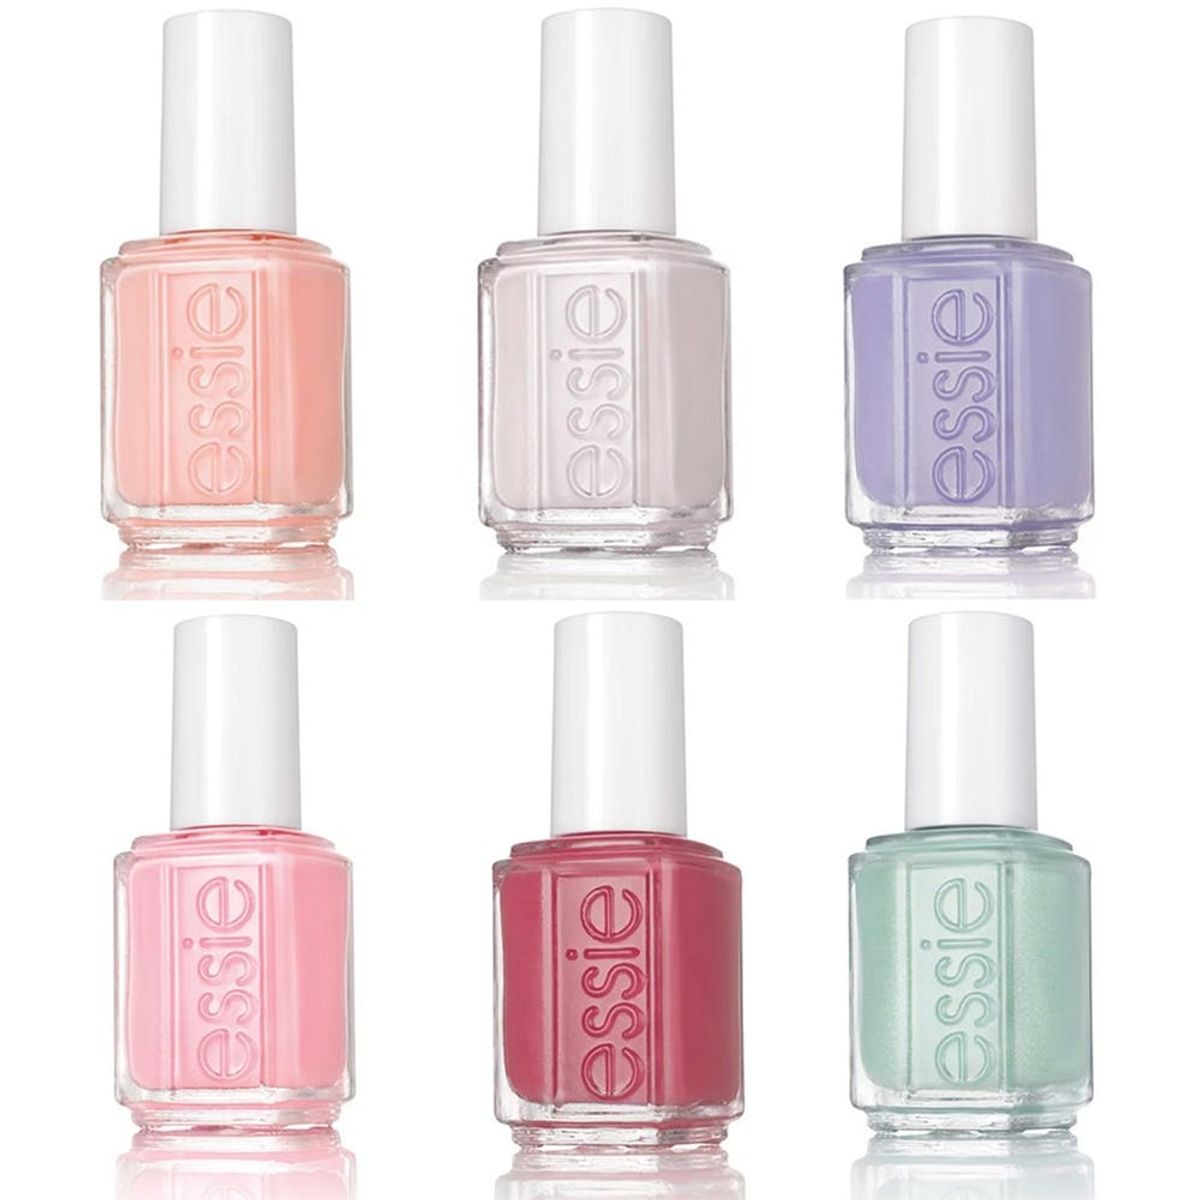 Essie Just Launched an Epic Bridal Collection - Brit + Co